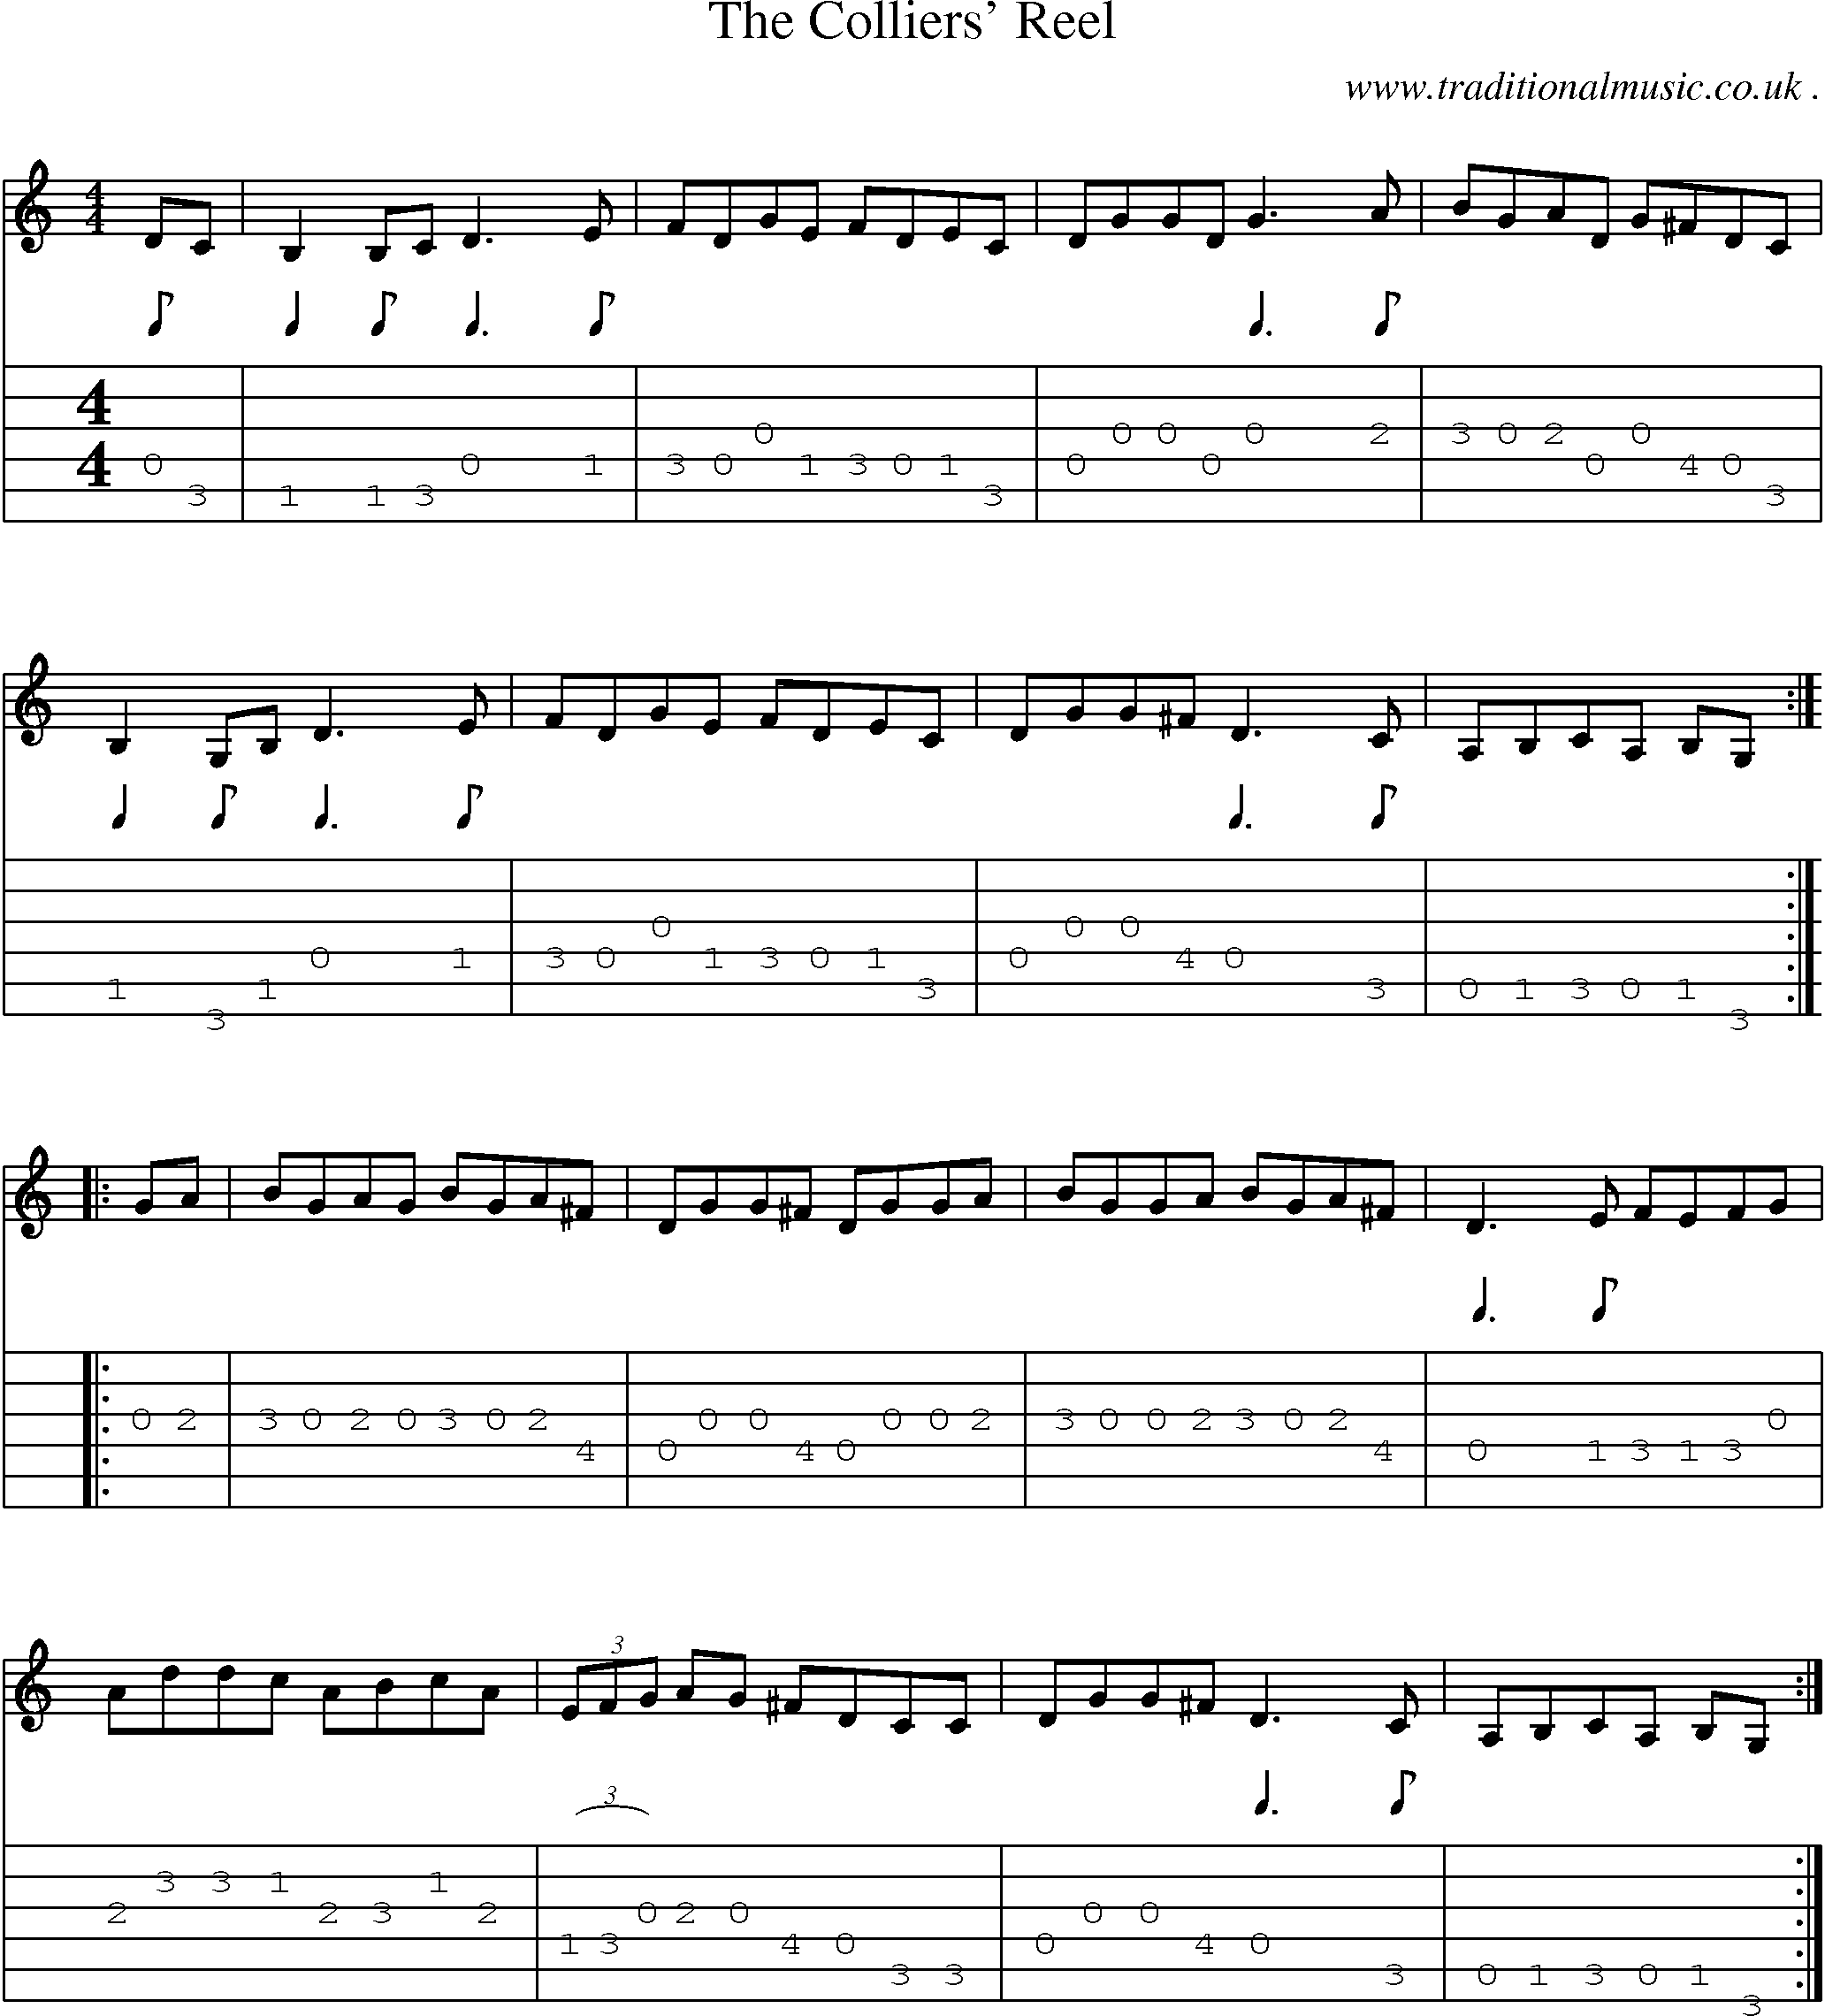 Sheet-Music and Guitar Tabs for The Colliers Reel